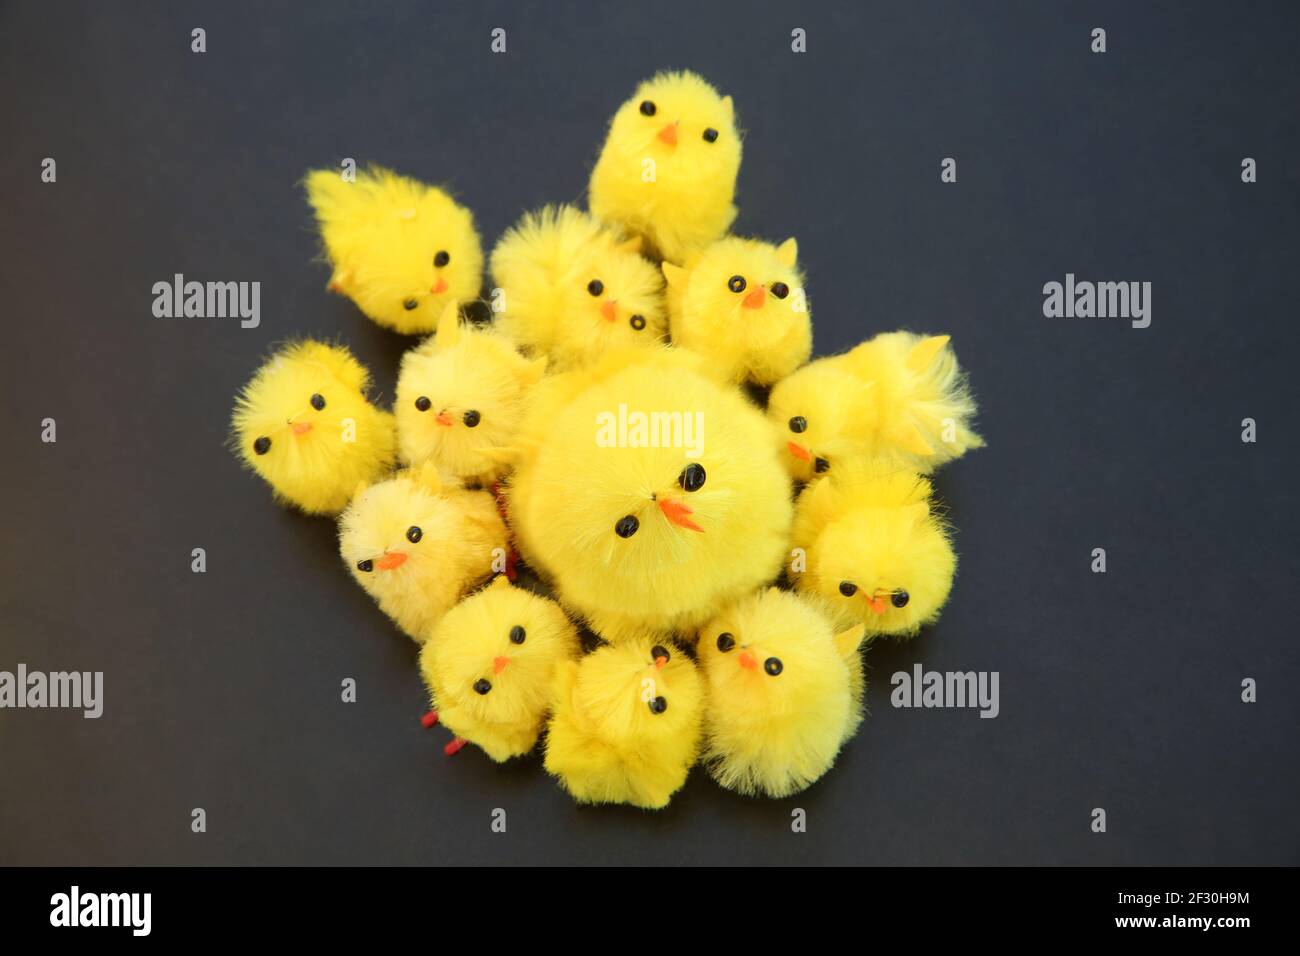 Yellow fluffy baby chicks for Easter cake decorations ready for easter against a dark background. Stock Photo